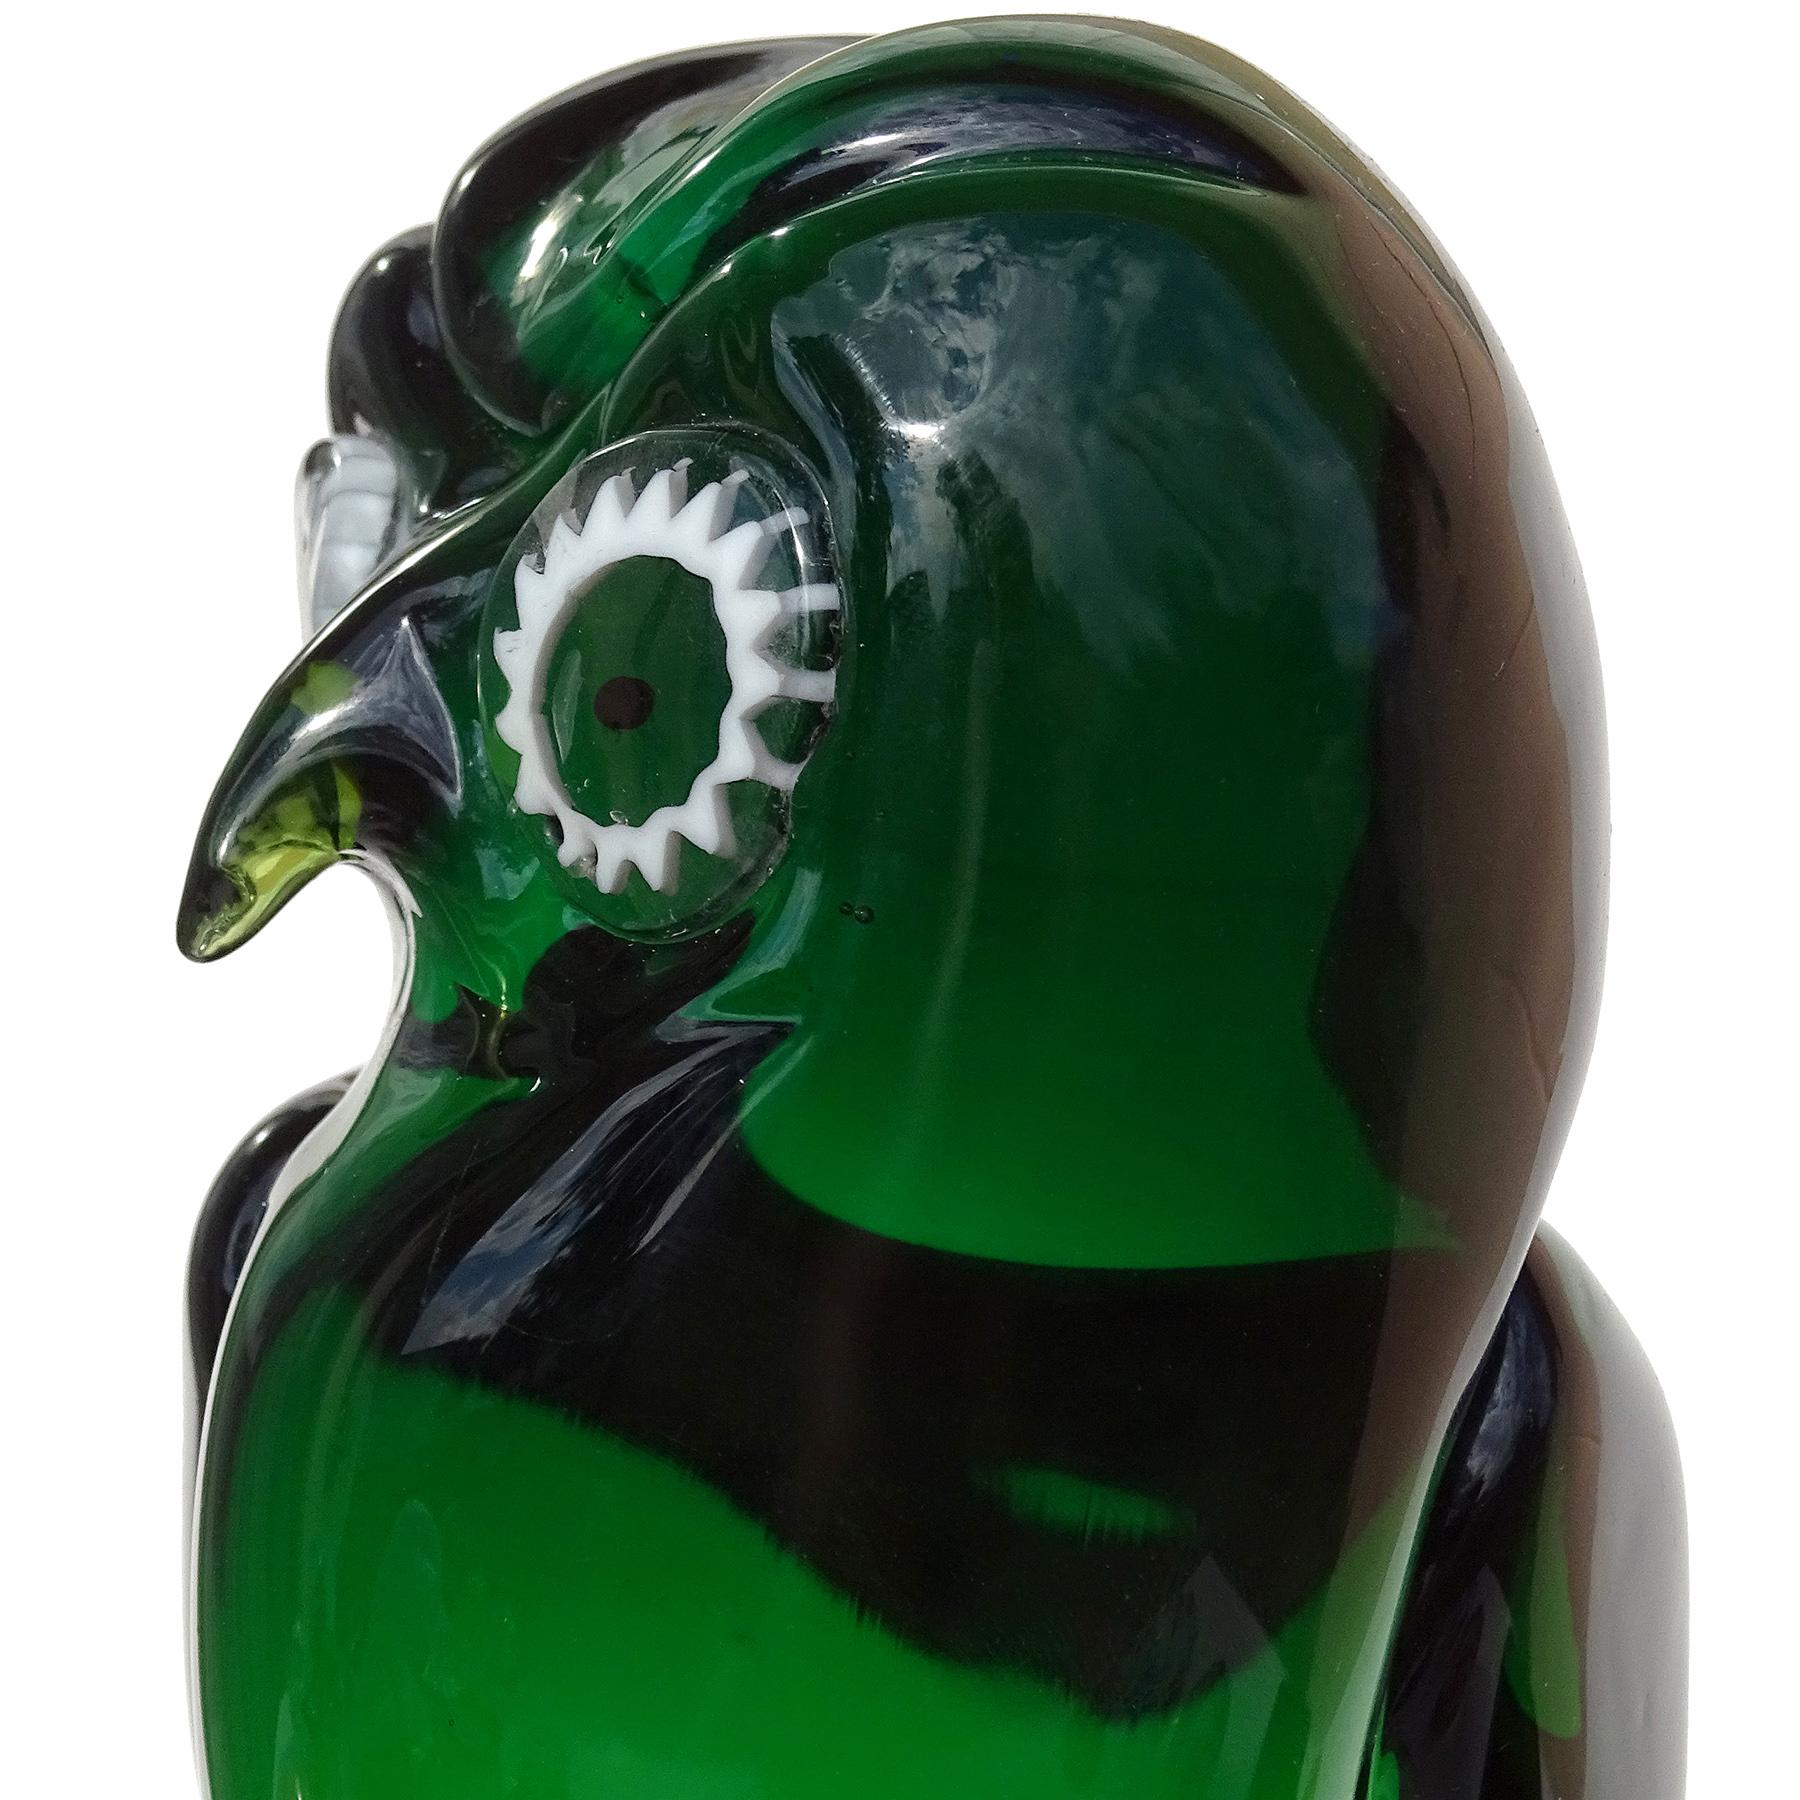 Hand-Crafted Salviati Murano Sommerso Emerald Green Italian Art Glass Owl Figure Sculpture For Sale